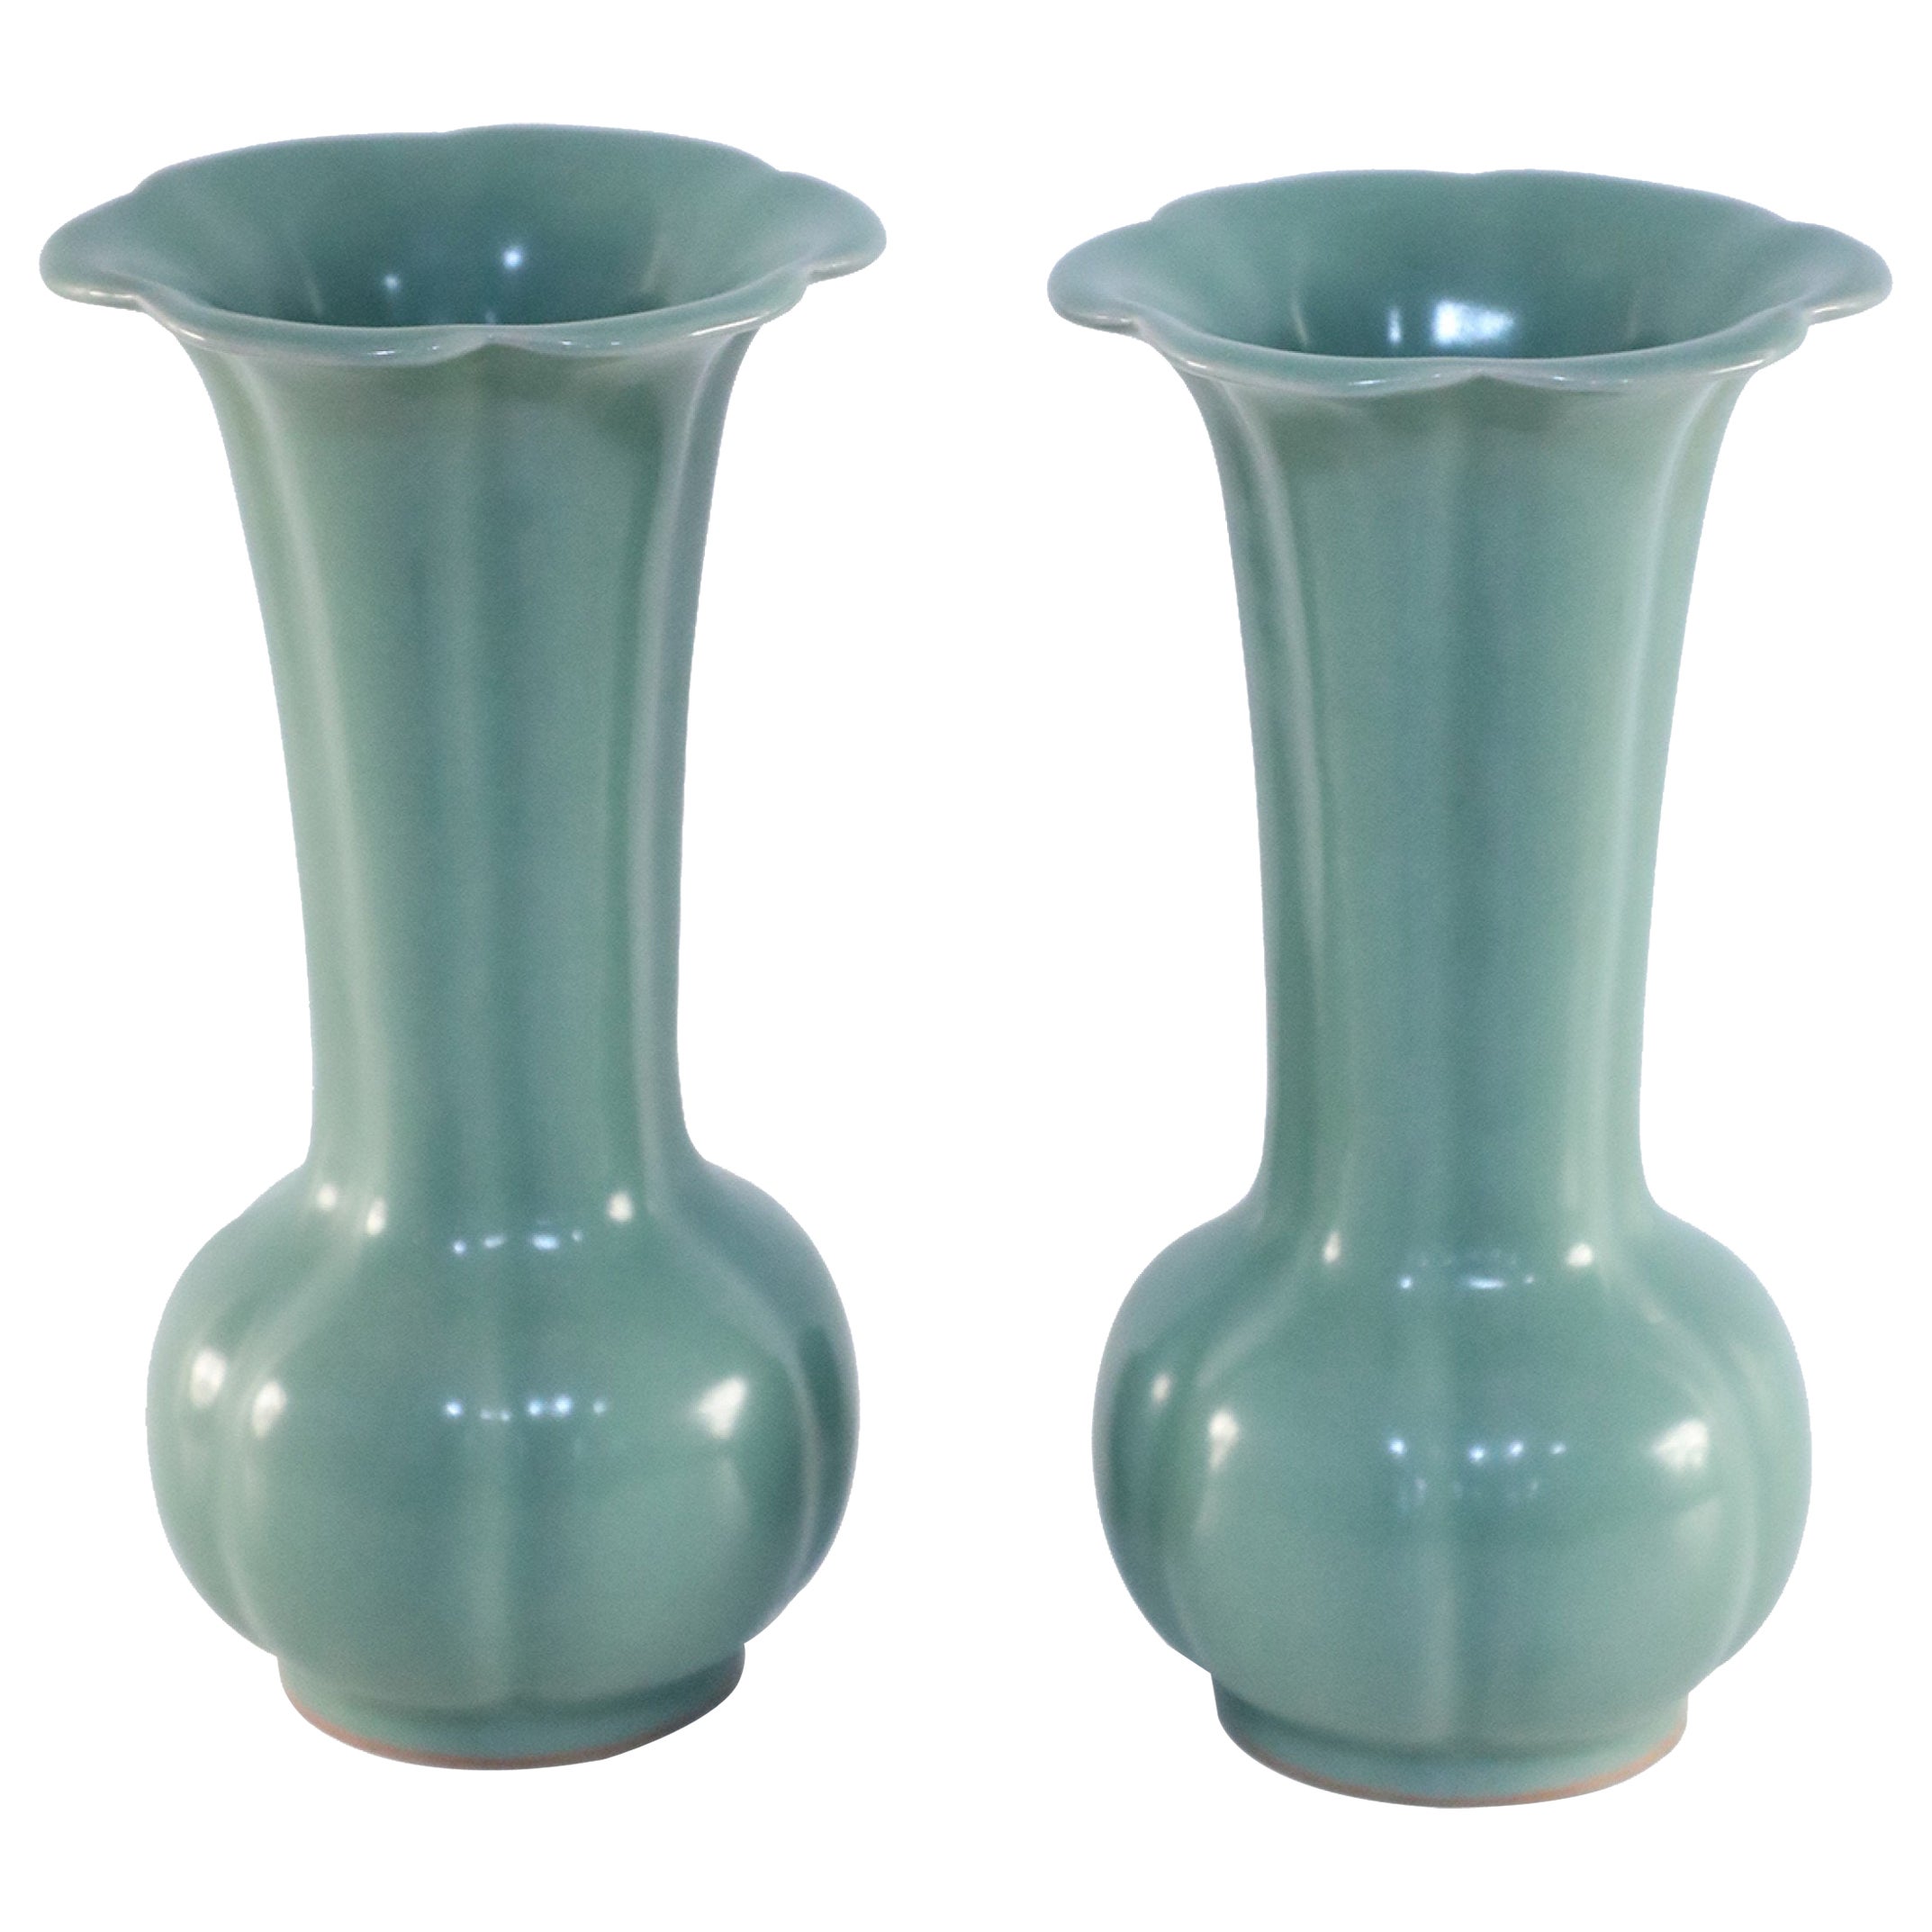 Pair of Chinese Fluted and Scalloped Celadon Porcelain Vases